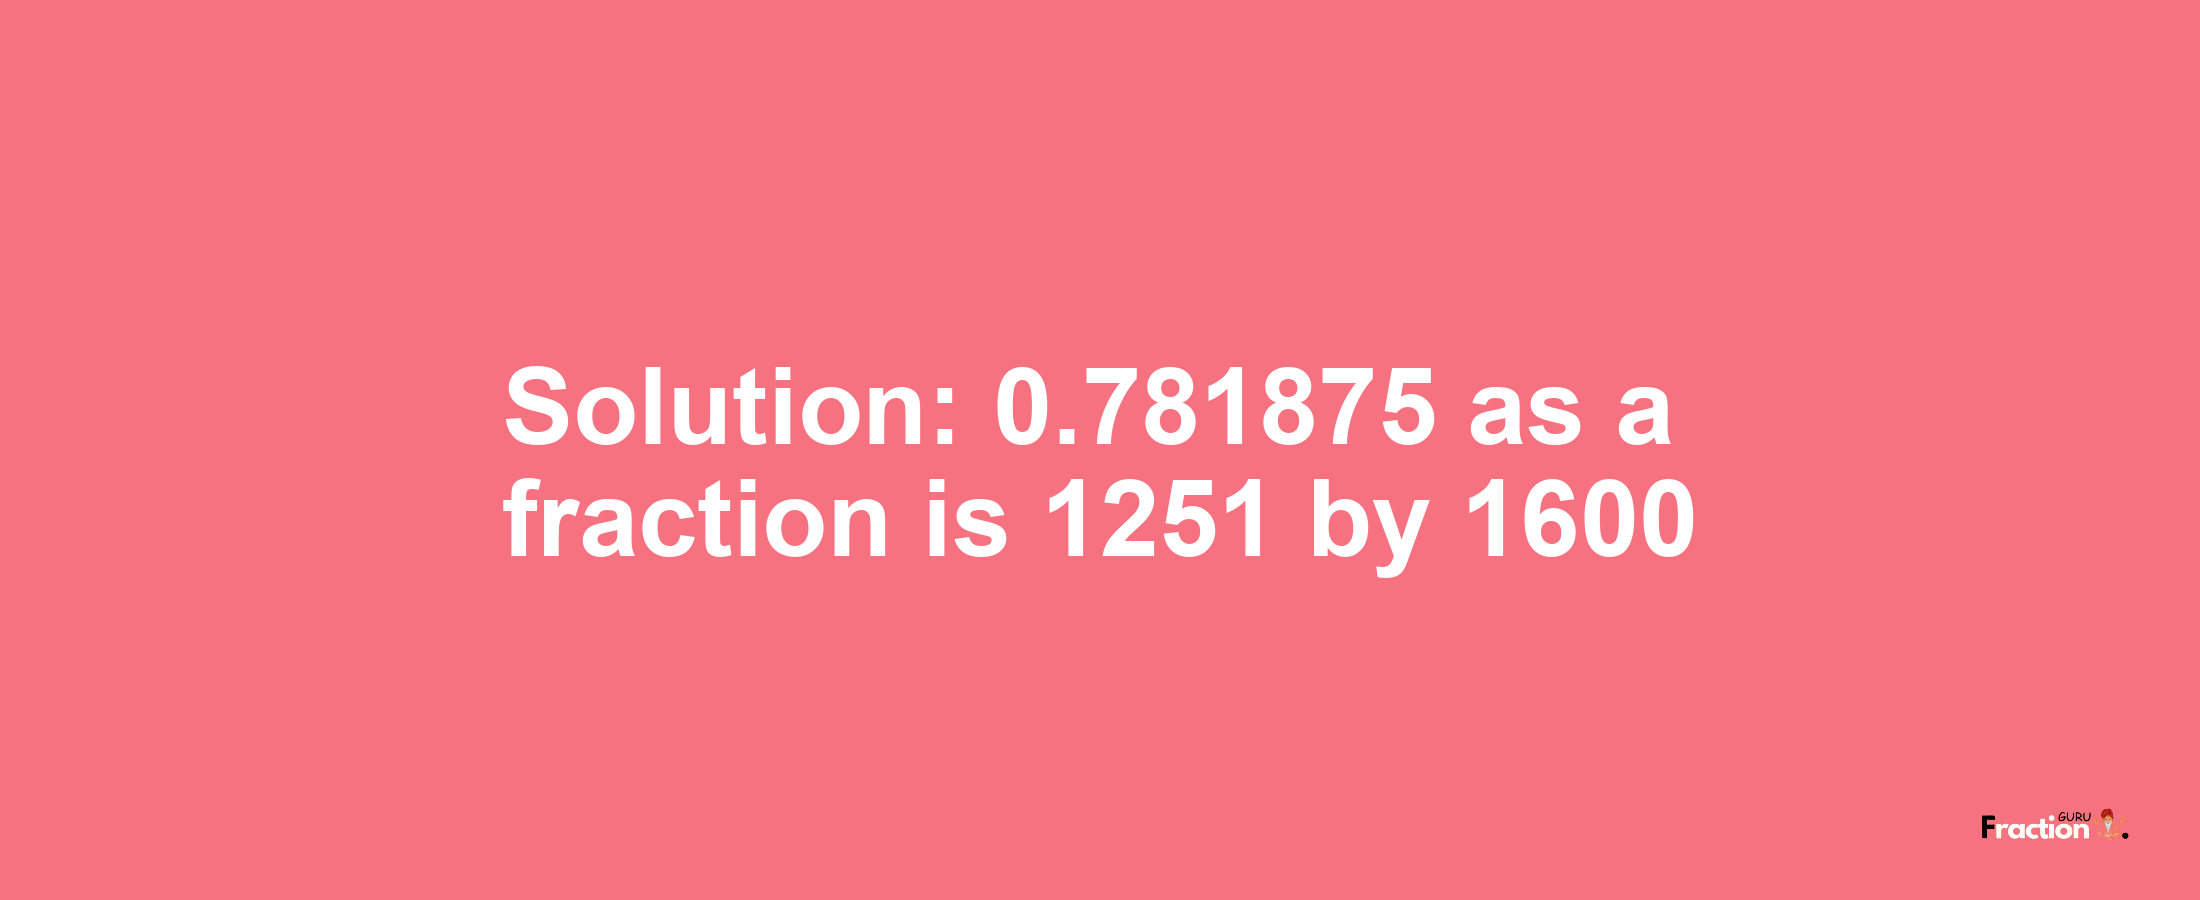 Solution:0.781875 as a fraction is 1251/1600